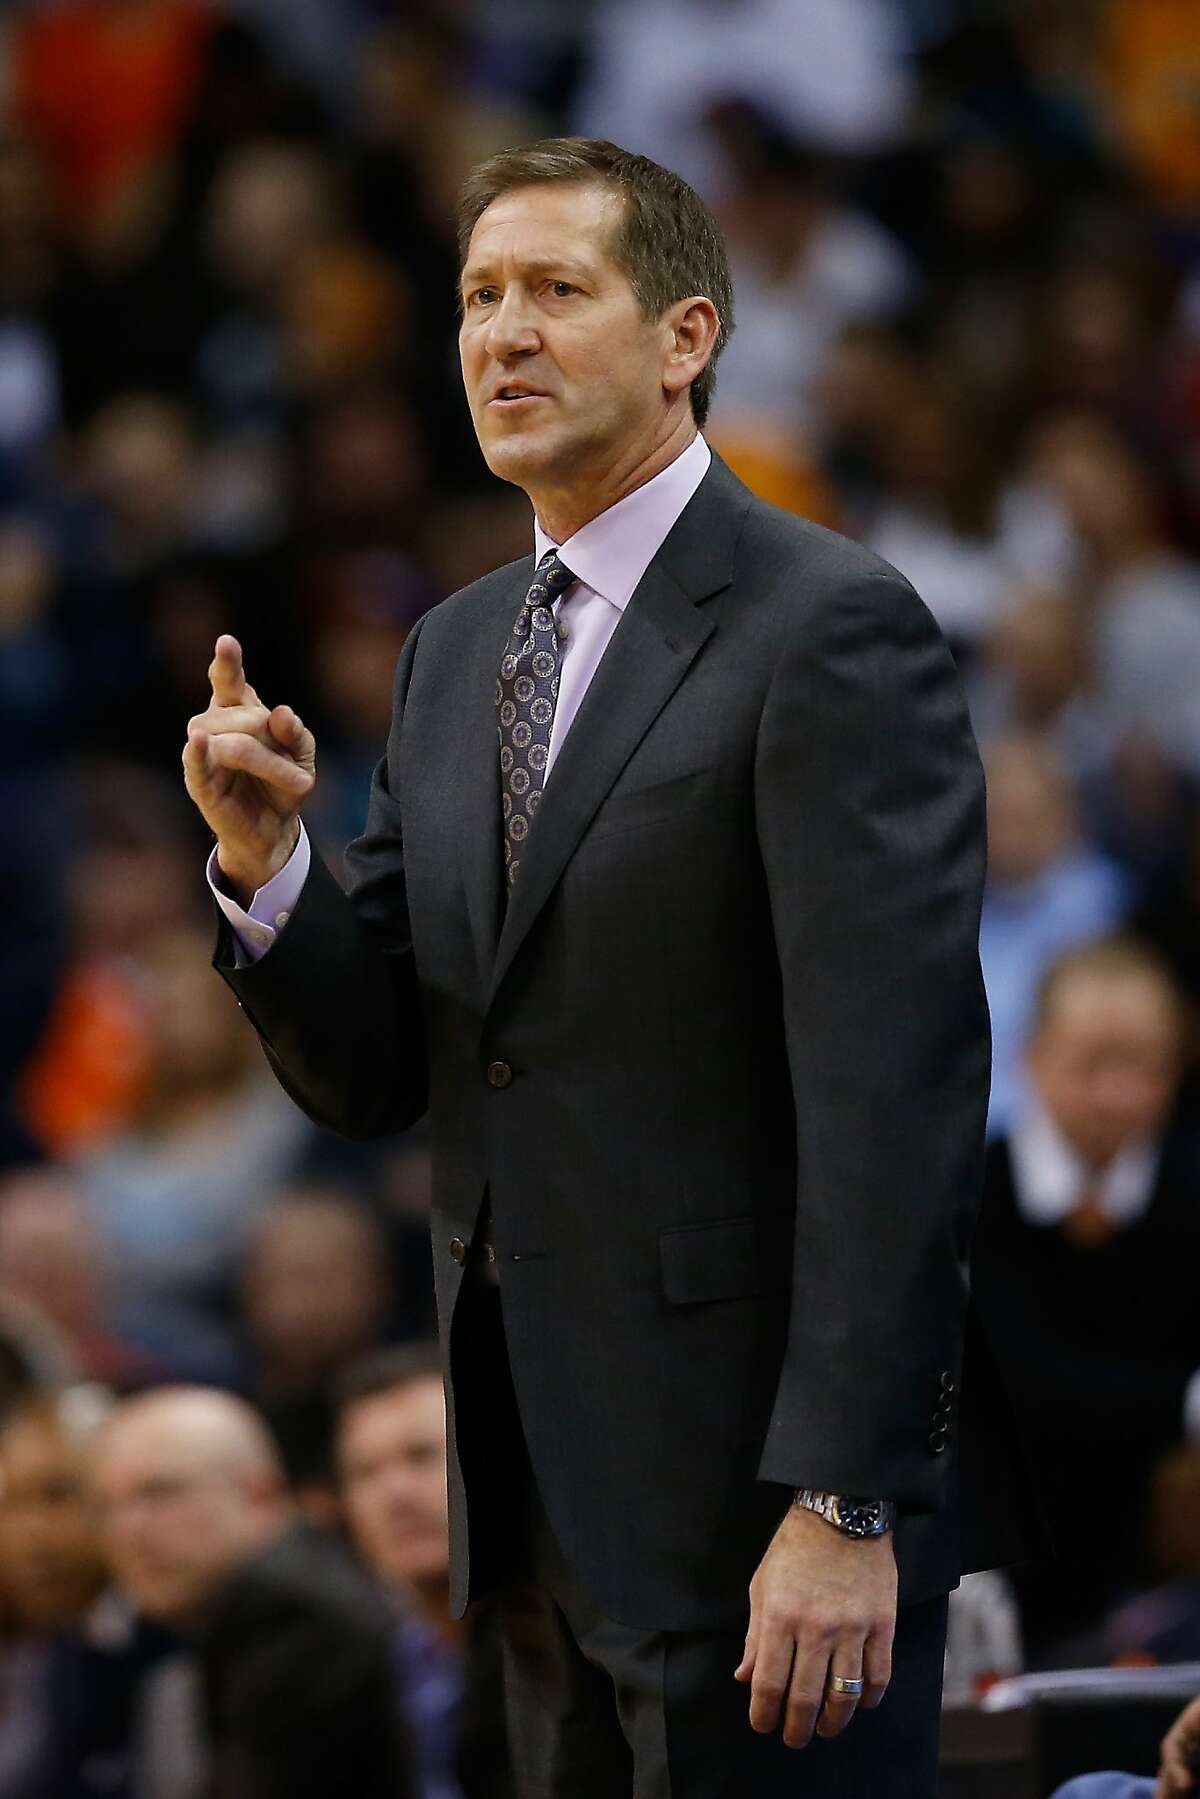 FILE - FEBRUARY 1: It was reported that head coach Jeff Hornacek was let go by the Phoenix Suns February 1, 2016 PHOENIX, AZ - DECEMBER 20: Head coach Jeff Hornacek of the Phoenix Suns reacts during the second half of the NBA game against the Milwaukee Bucks at Talking Stick Resort Arena on December 20, 2015 in Phoenix, Arizona. The Bucks defeated the Suns 101-95 NOTE TO USER: User expressly acknowledges and agrees that, by downloading and or using this photograph, User is consenting to the terms and conditions of the Getty Images License Agreement. (Photo by Christian Petersen/Getty Images)